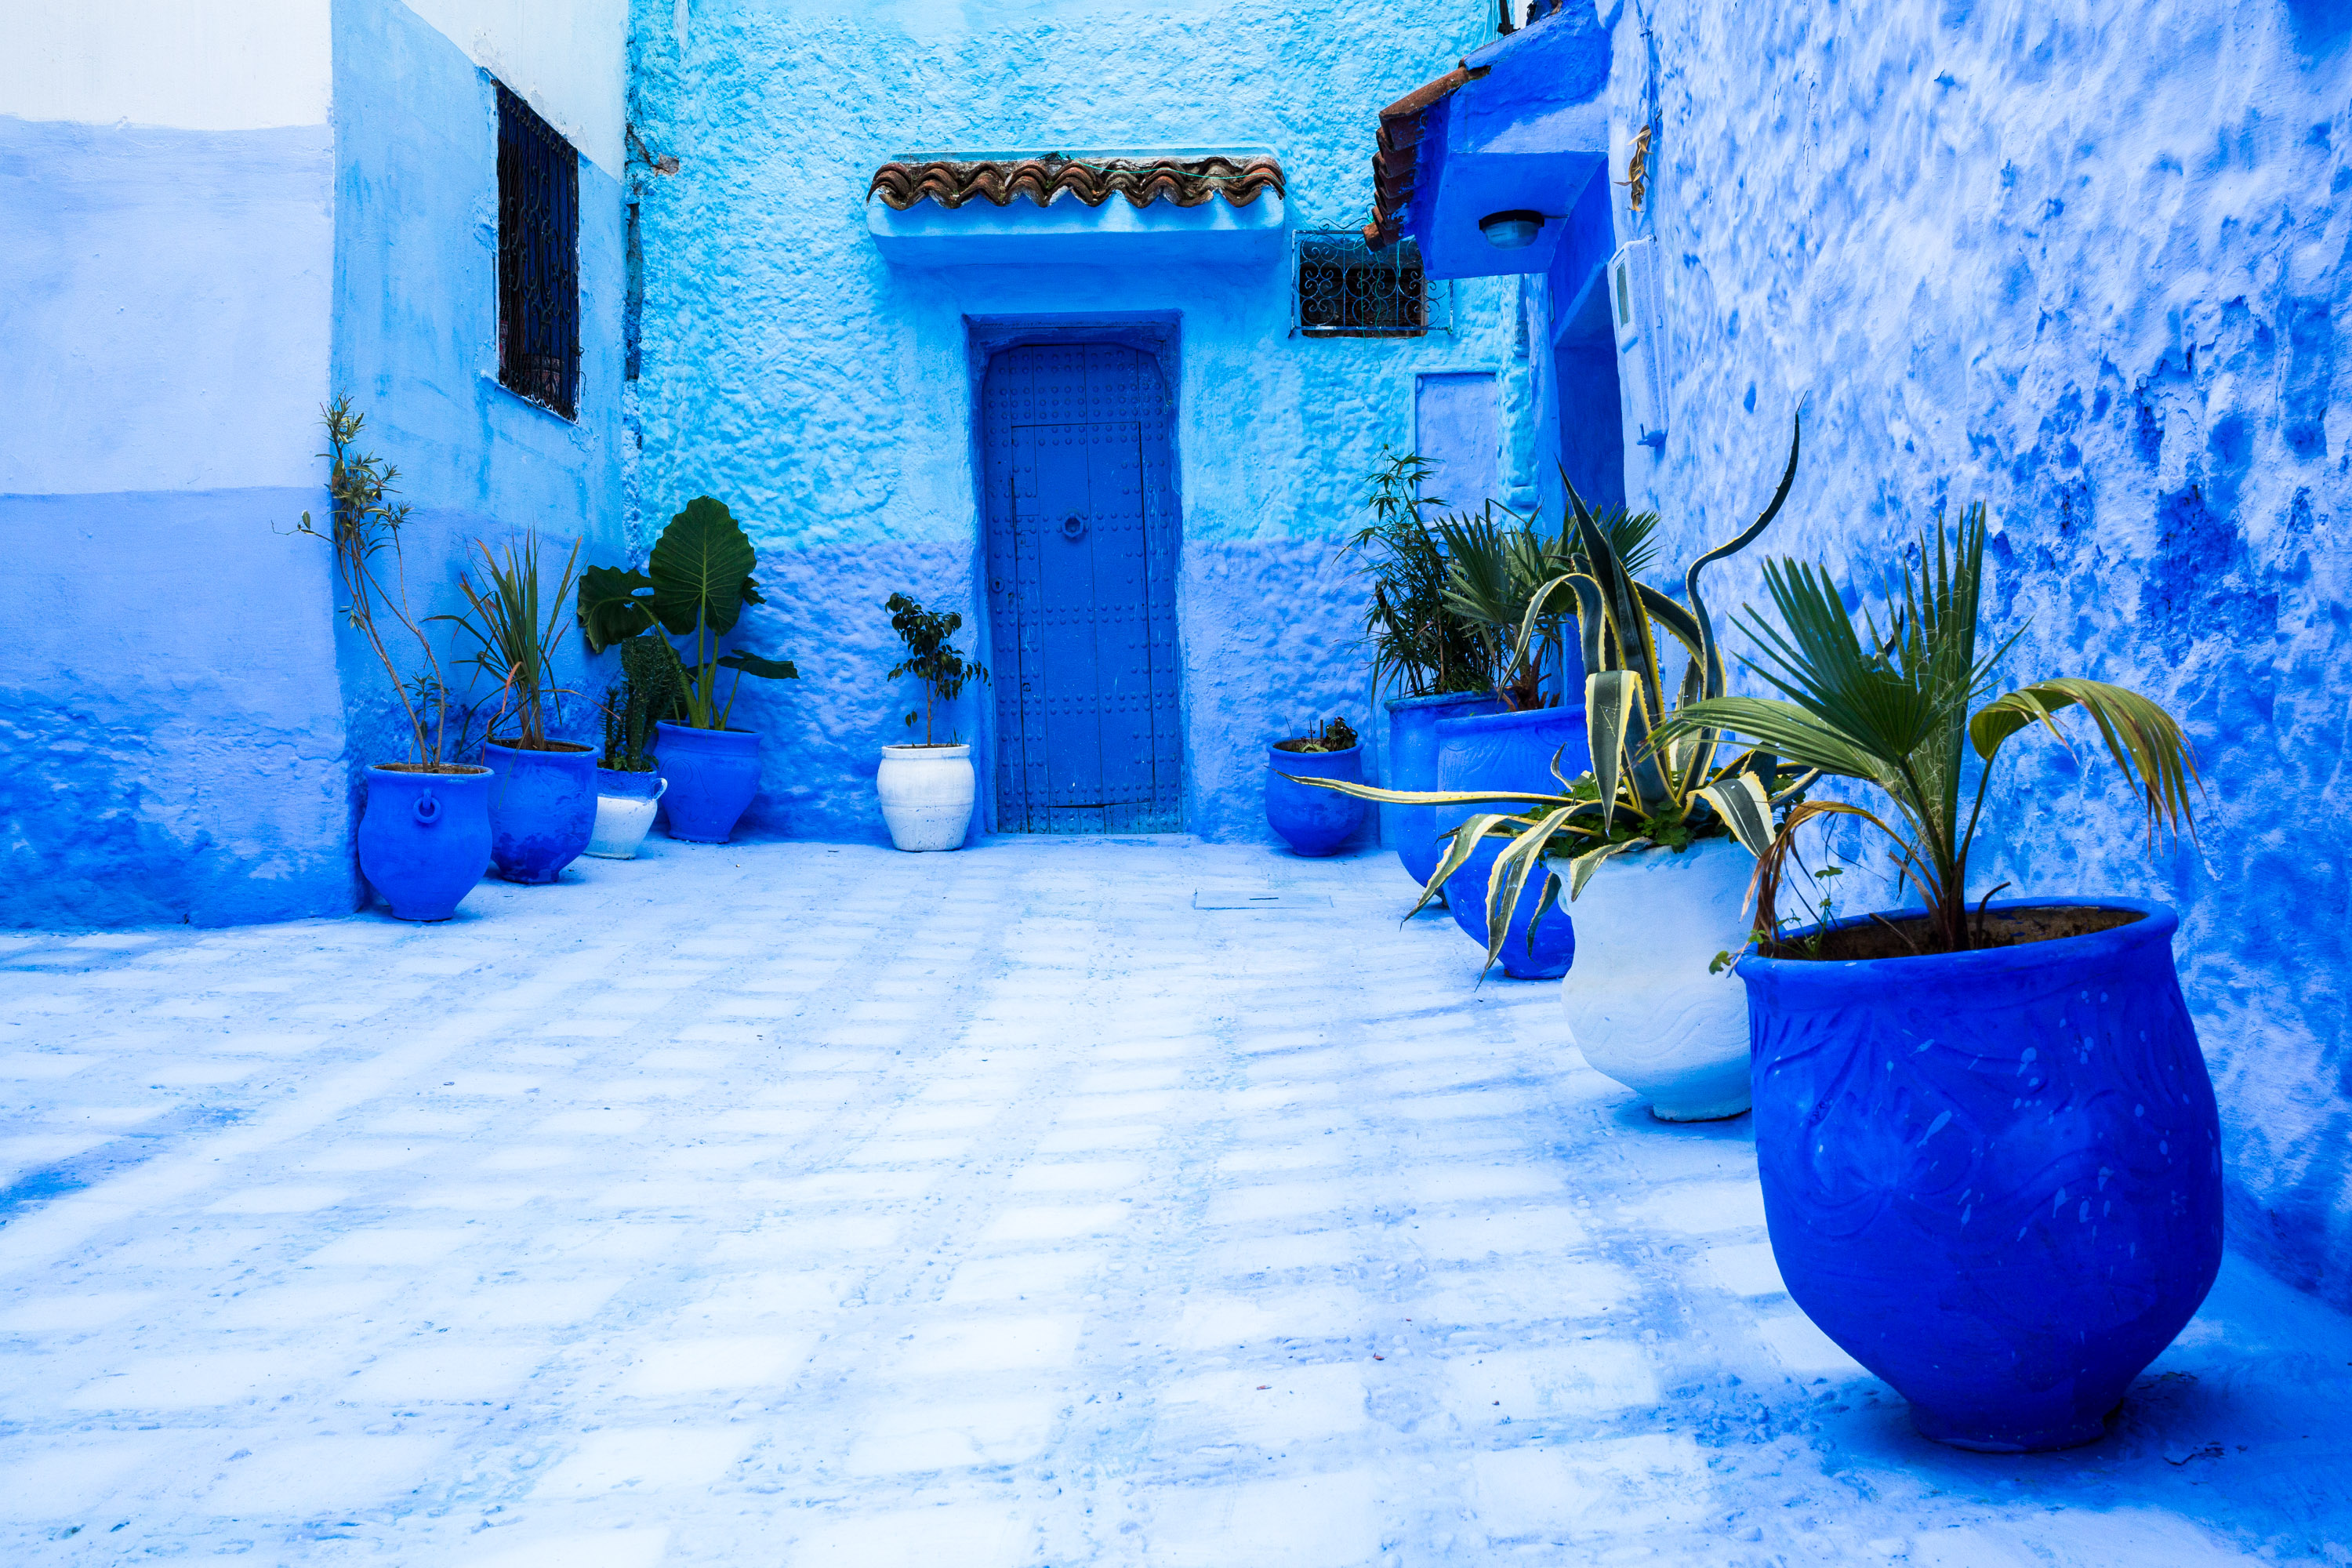 Chefchaouen – ‘The Blue Pearl’